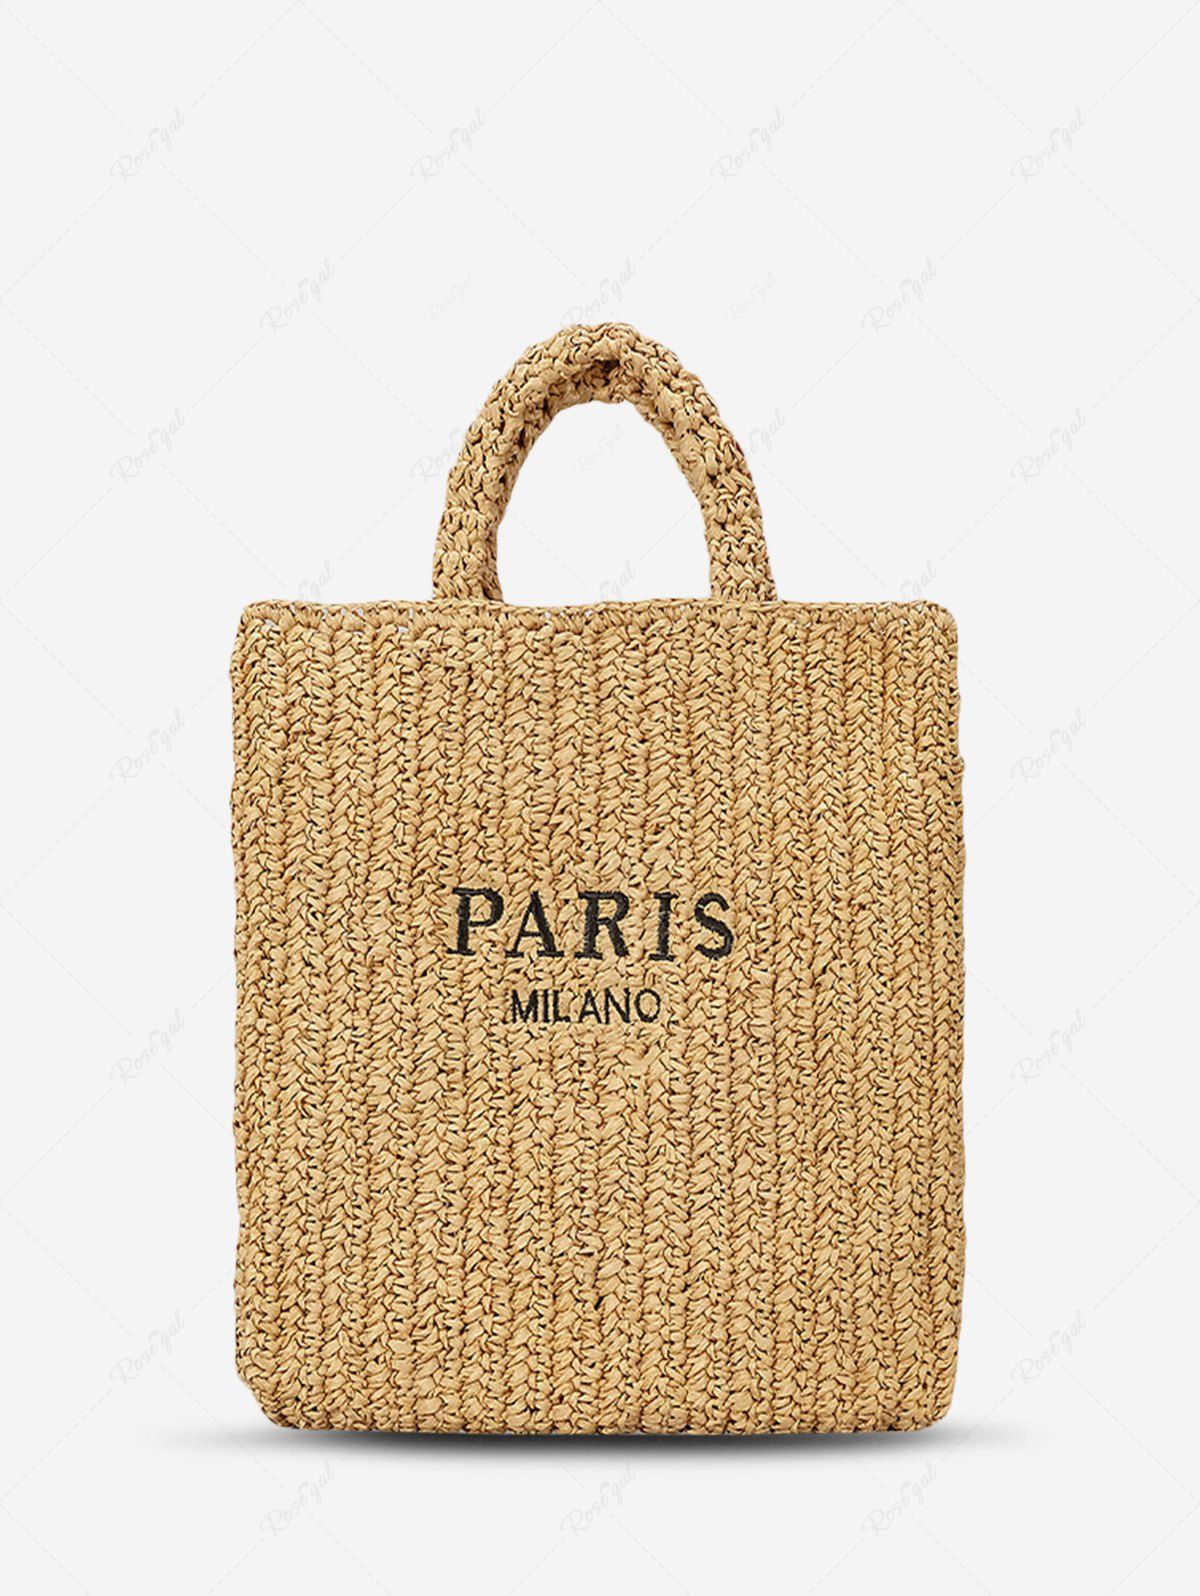 Chic Women's Beach Vacation Letter Embroidered Design Straw Raffia Basket Tote Bag  